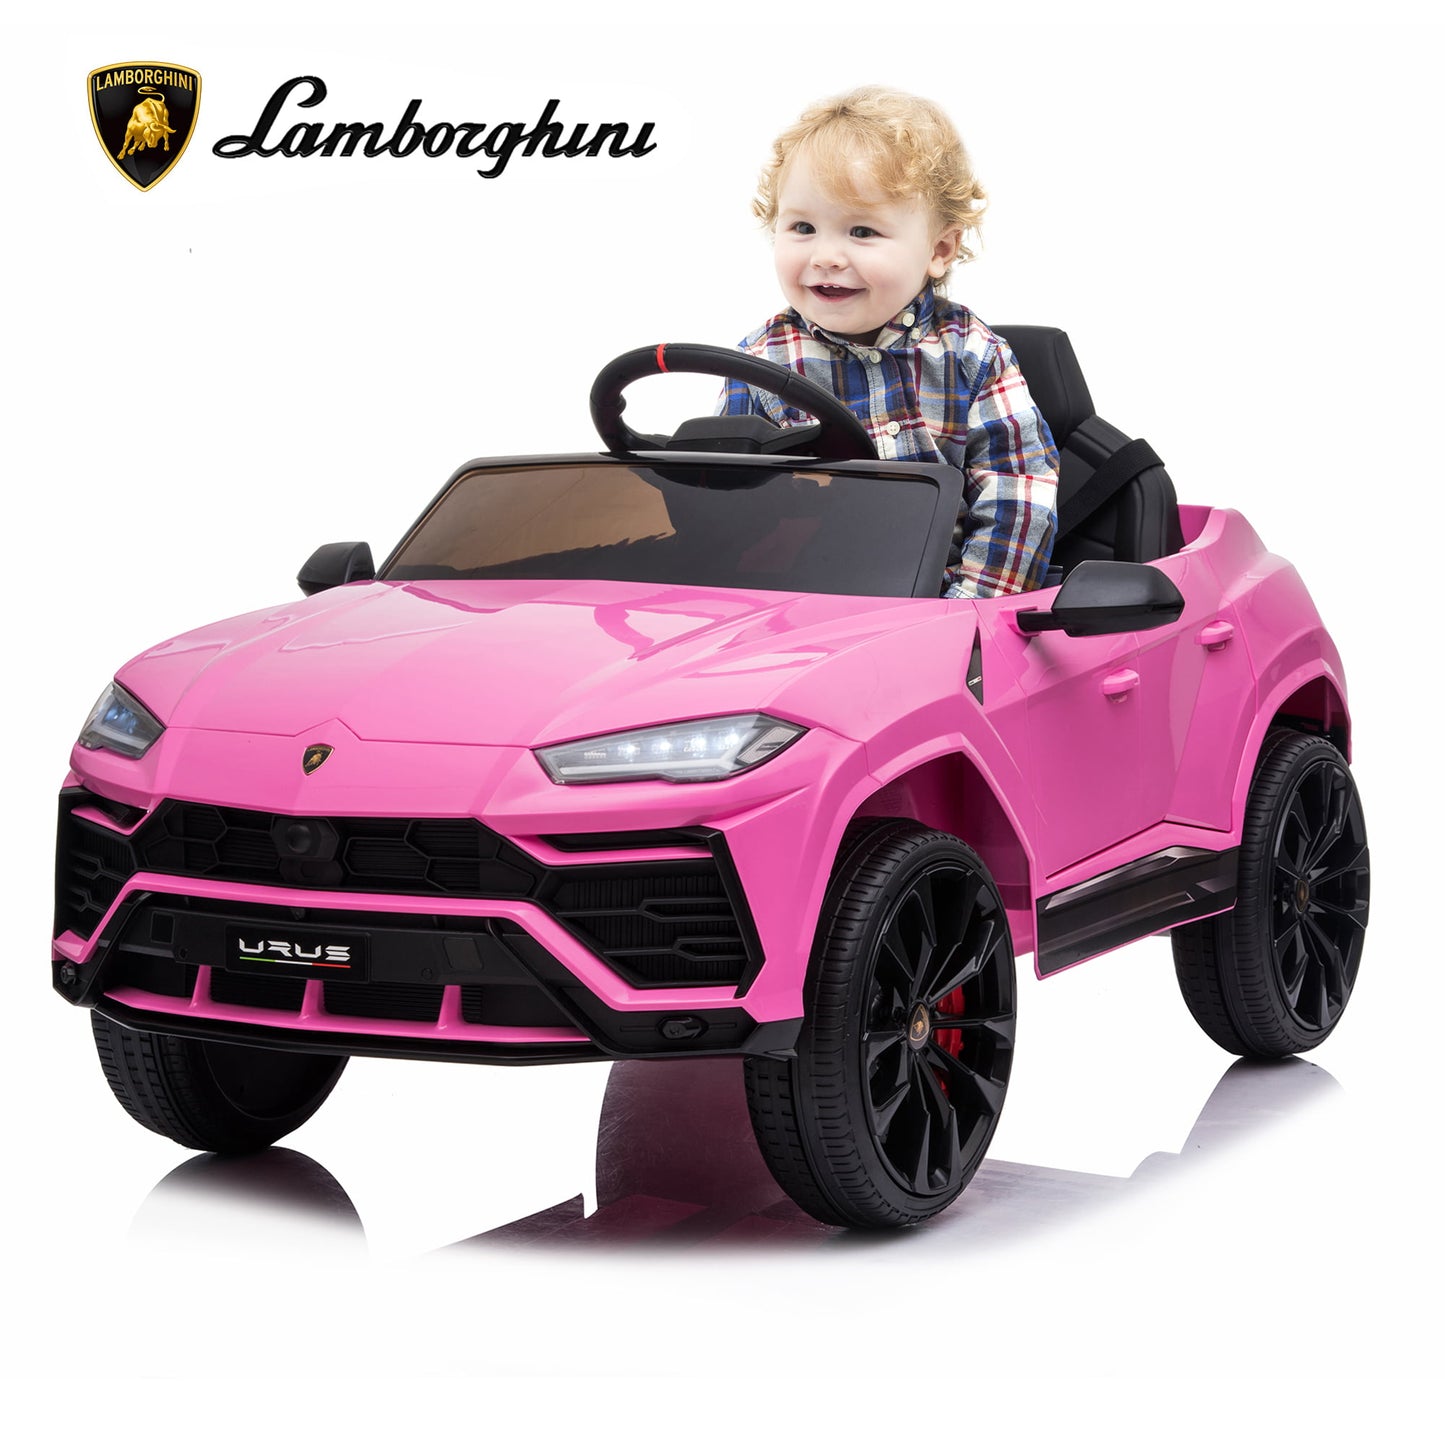 12V Kids Ride on Car for Girls Boys, Pink Electric Car Kids Battery Powered Toys with Parent Remote Control, LED Headlights, 3 Adjustable Speeds, Birthday Gift Christmas Gift for Kids